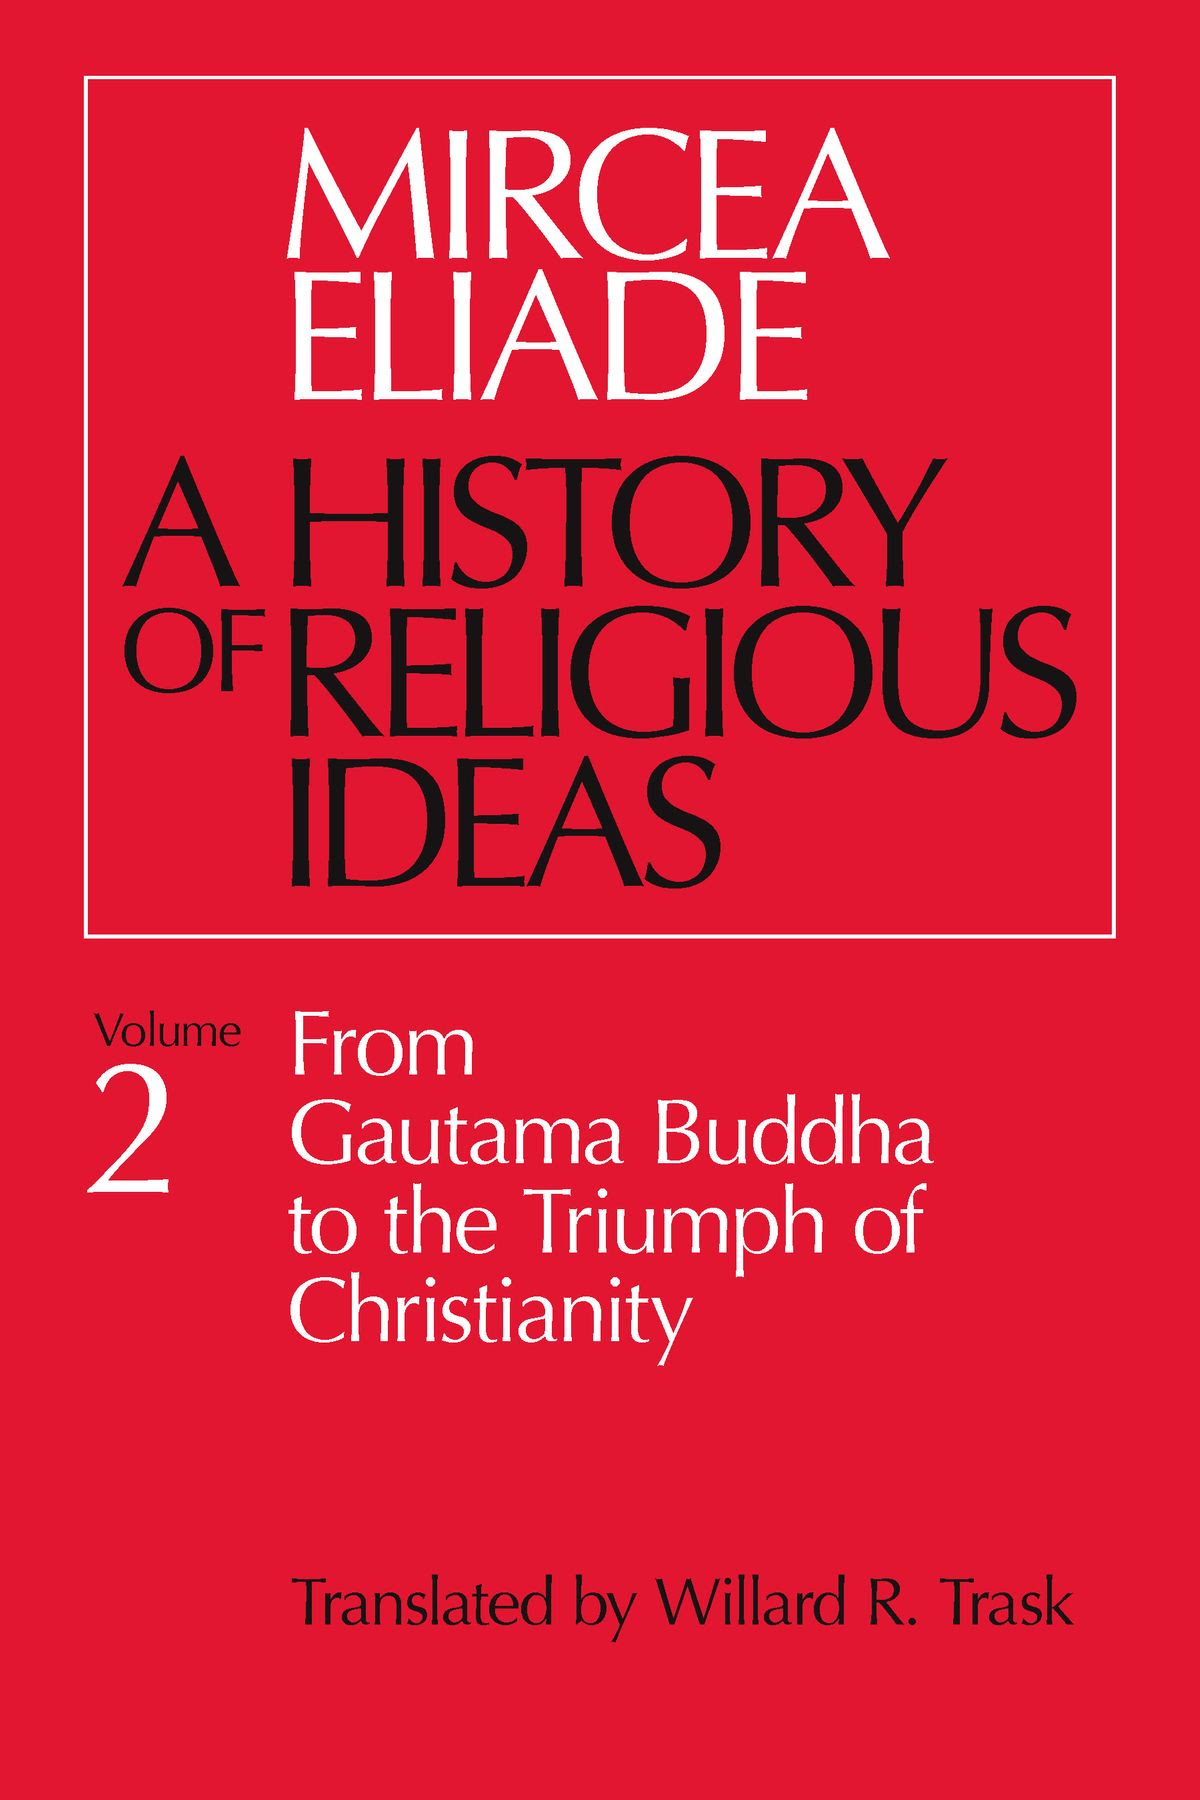 A History of Religious Ideas, Volume 2: From Gautama Buddha to the Triumph of Christianity PDF